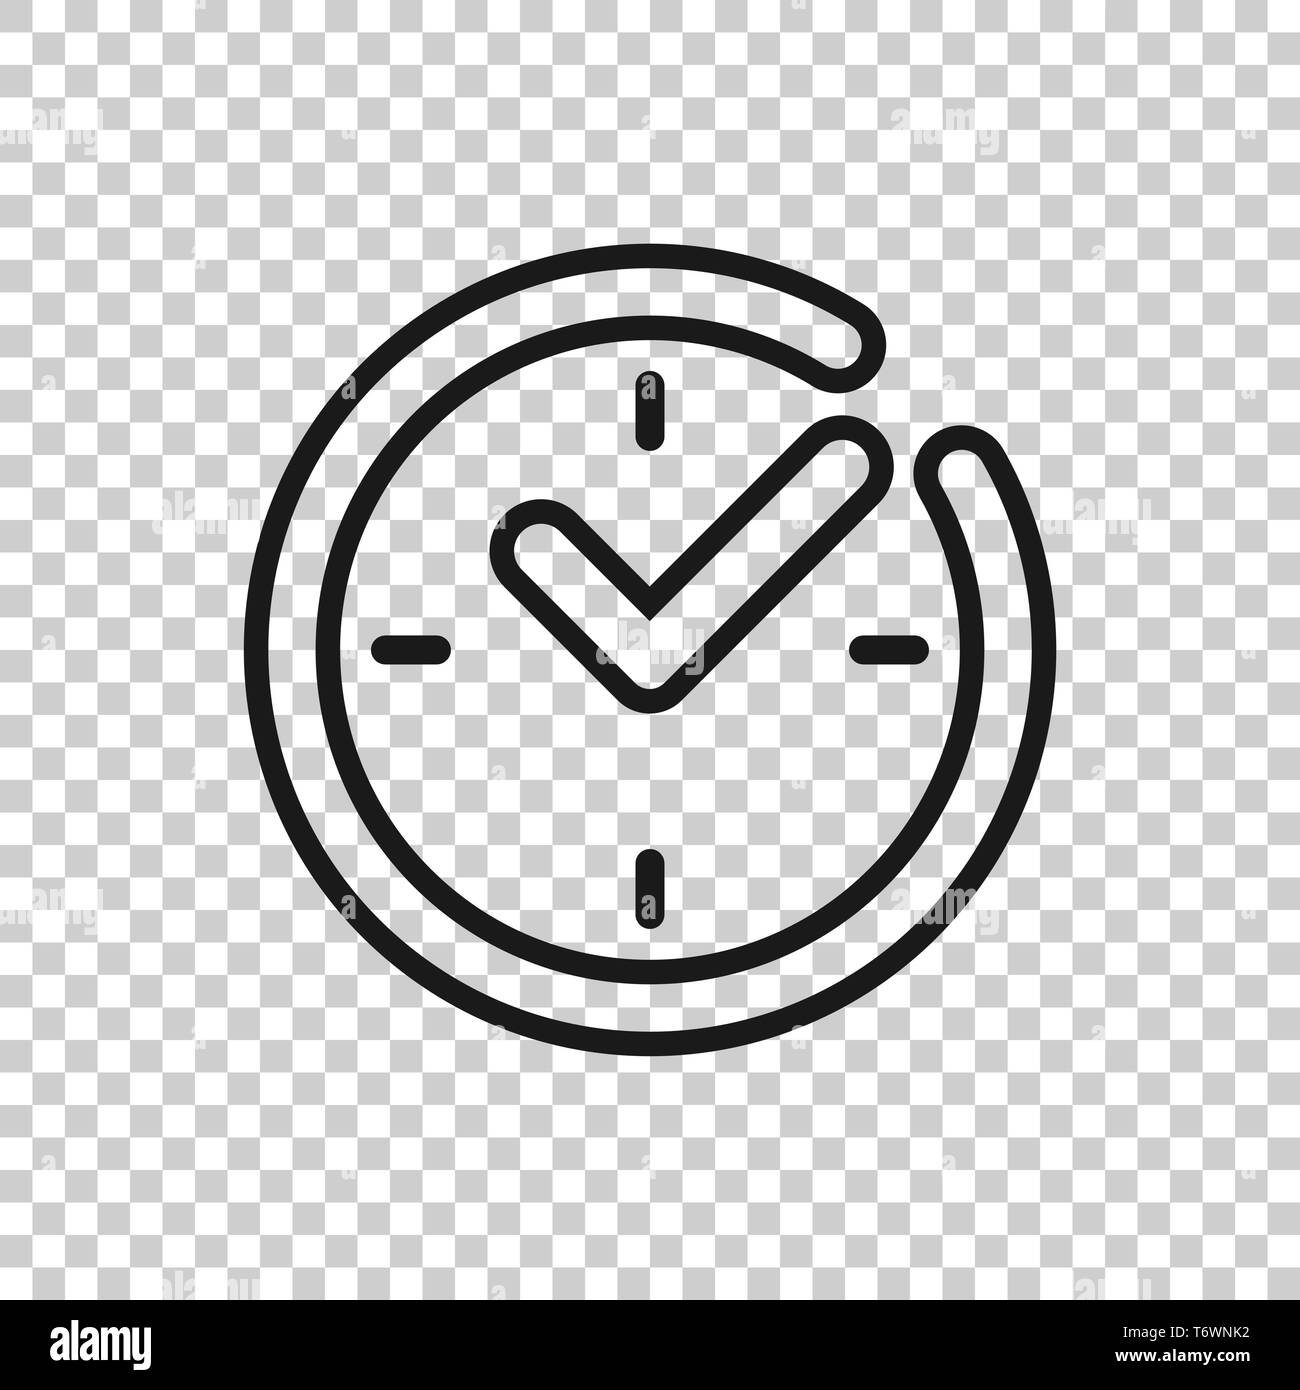 Real time icon in transparent style. Clock vector illustration on isolated background. Watch business concept. Stock Vector